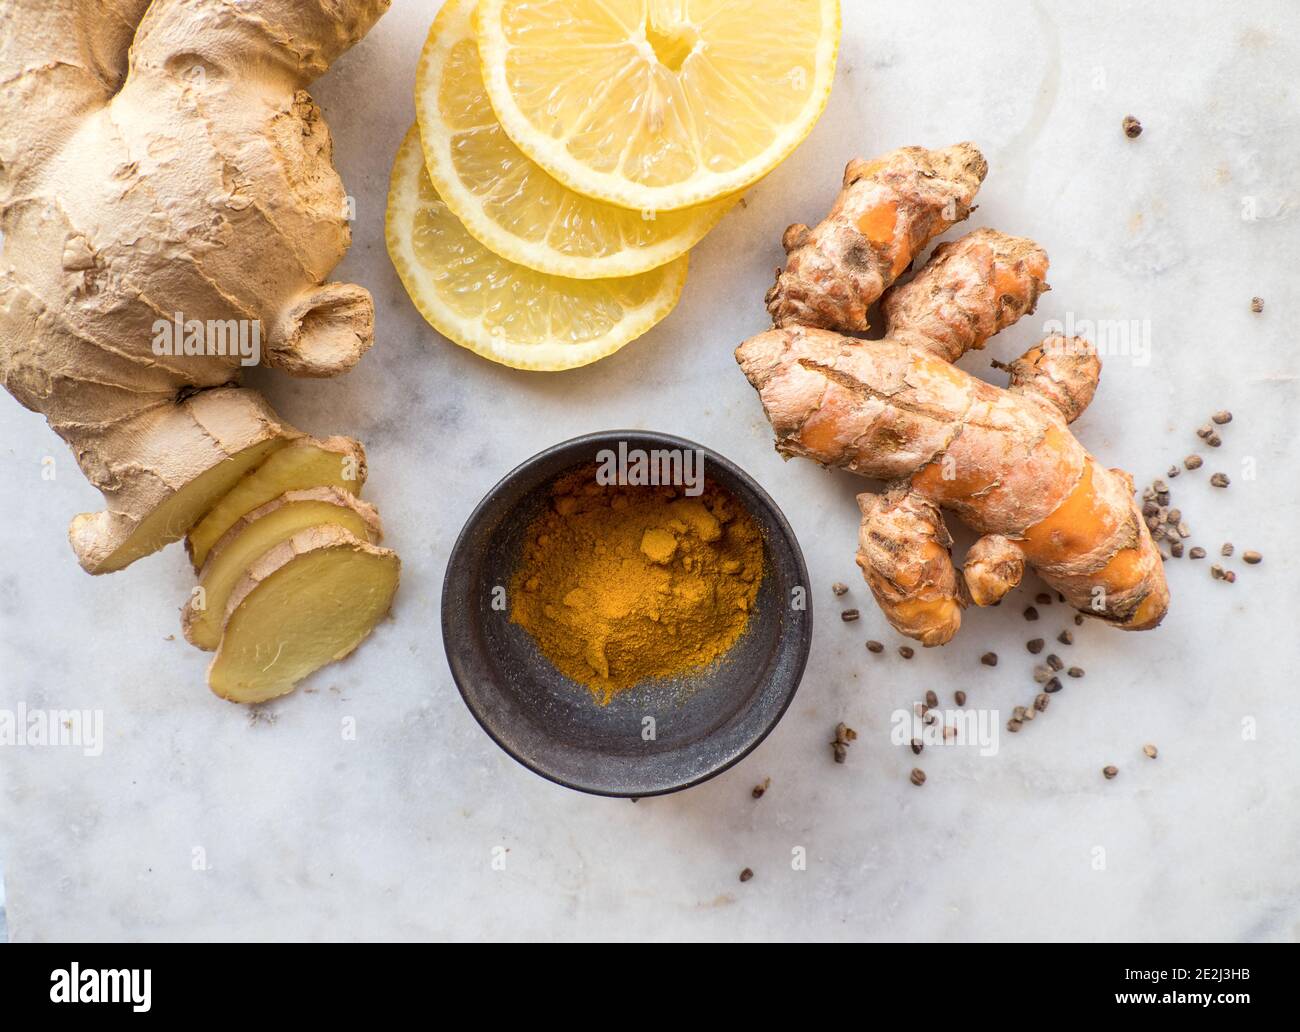 Naturally healthy and immune system boosting Turmeric spice powder, lemon slices and ginger roots Stock Photo